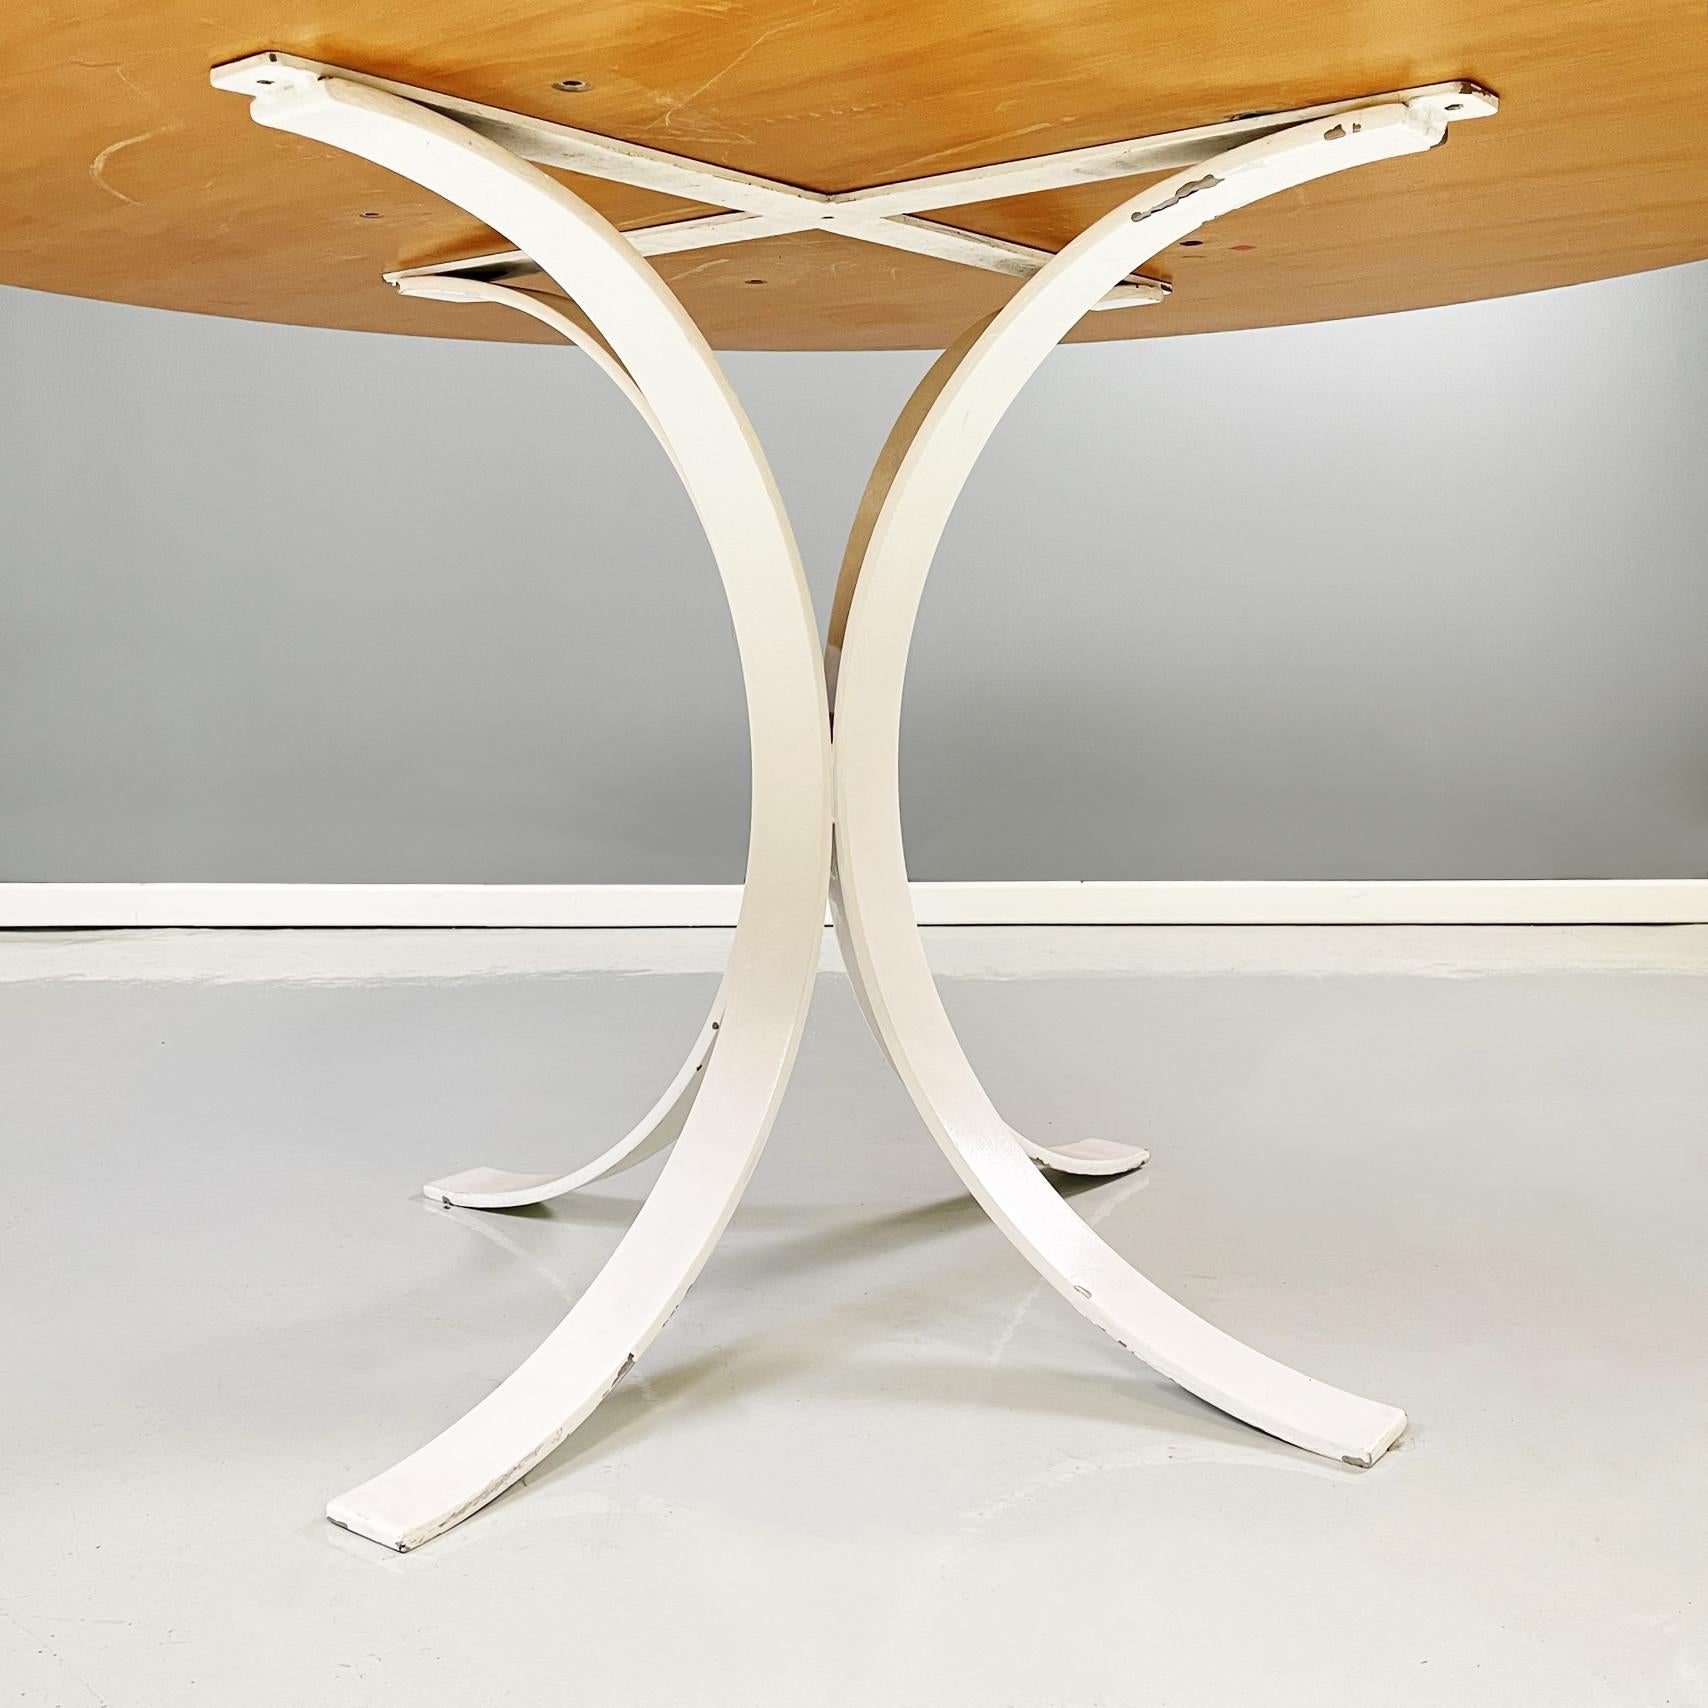 Italian Modern Round Dining Table in White Metal and Solid Wood, 1970s For Sale 4